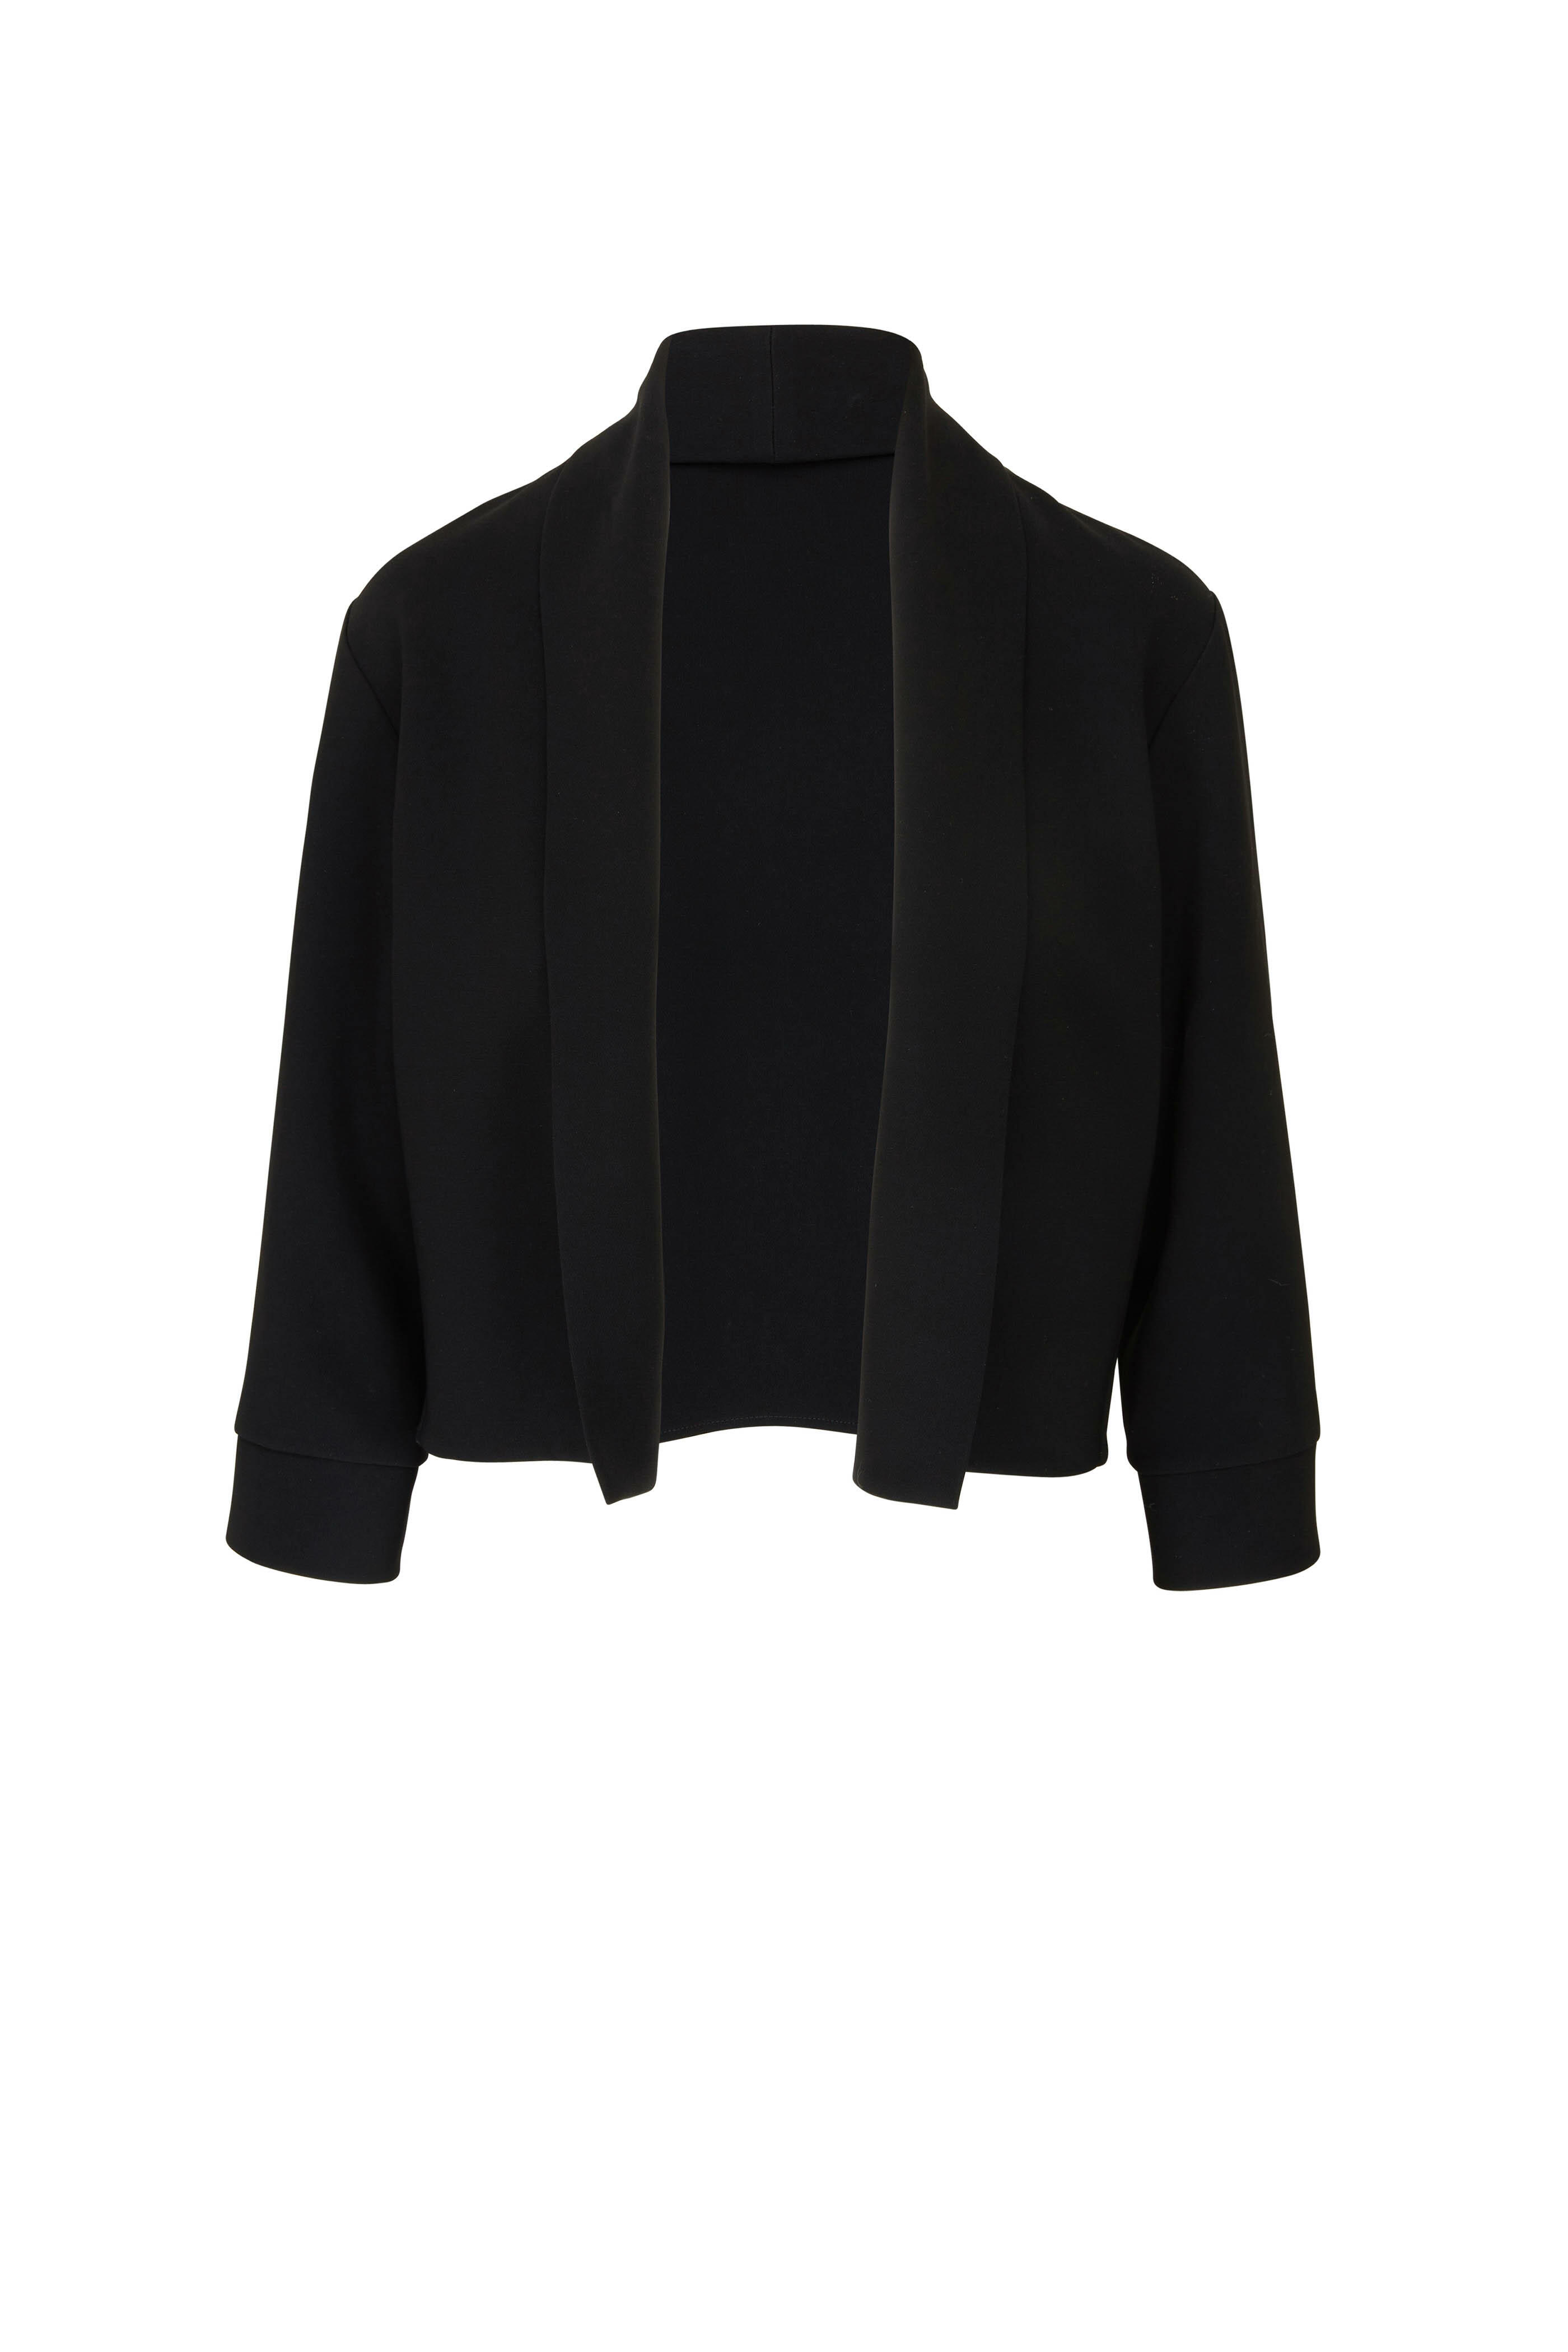 Peter Cohen - Trove Black NY Crepe Jacket | Mitchell Stores